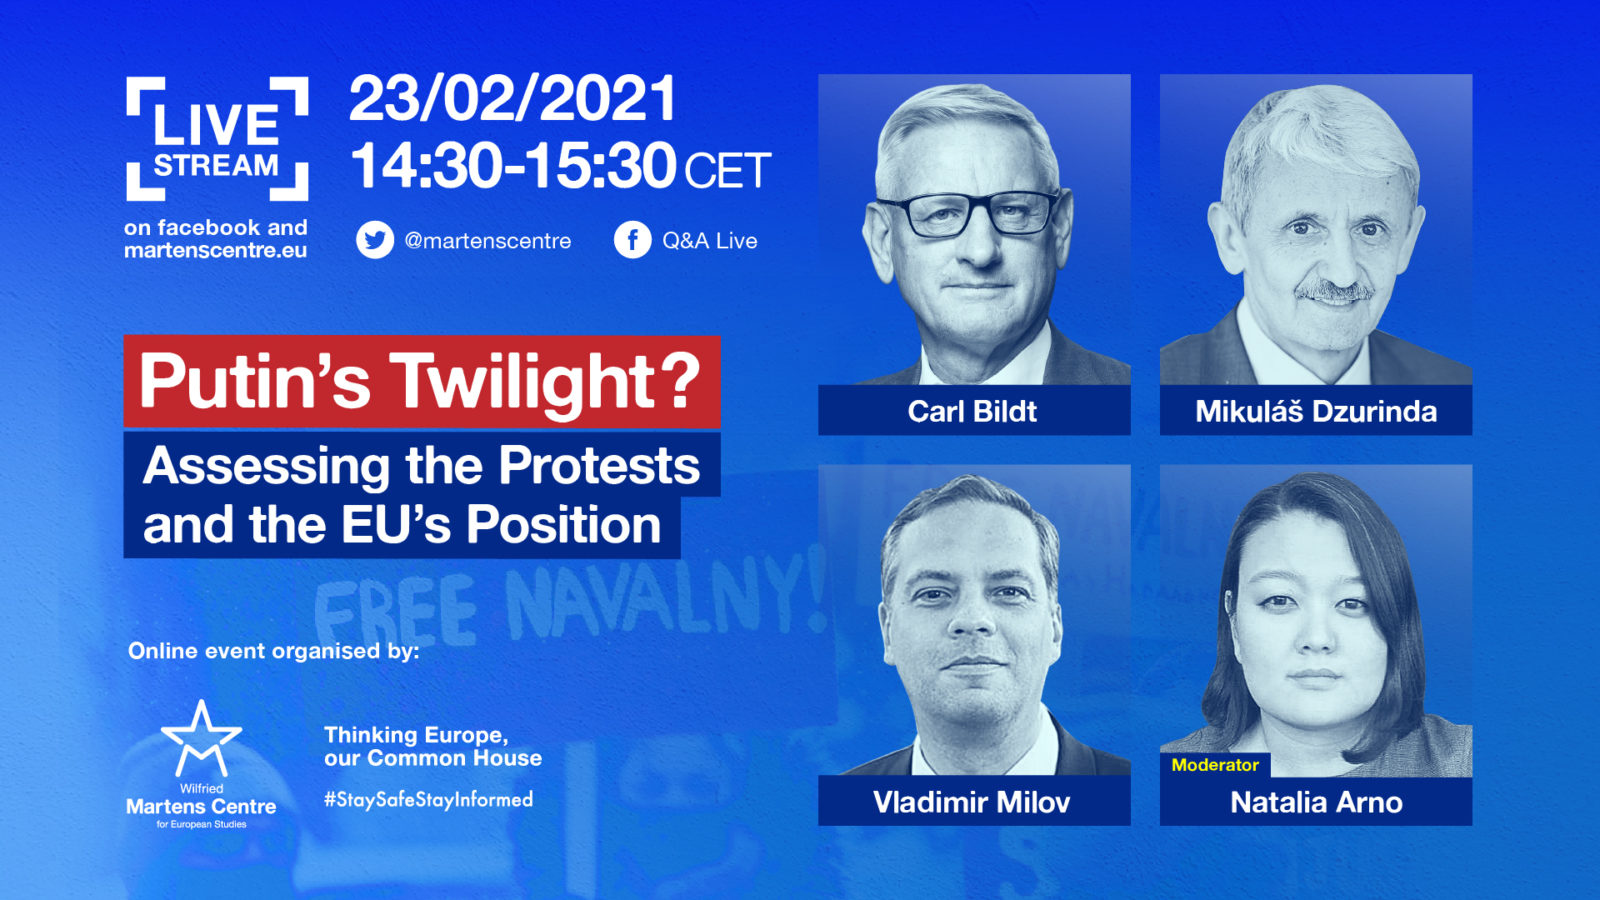 Putin’s Twilight? Assessing the Protests and the EU’s Position